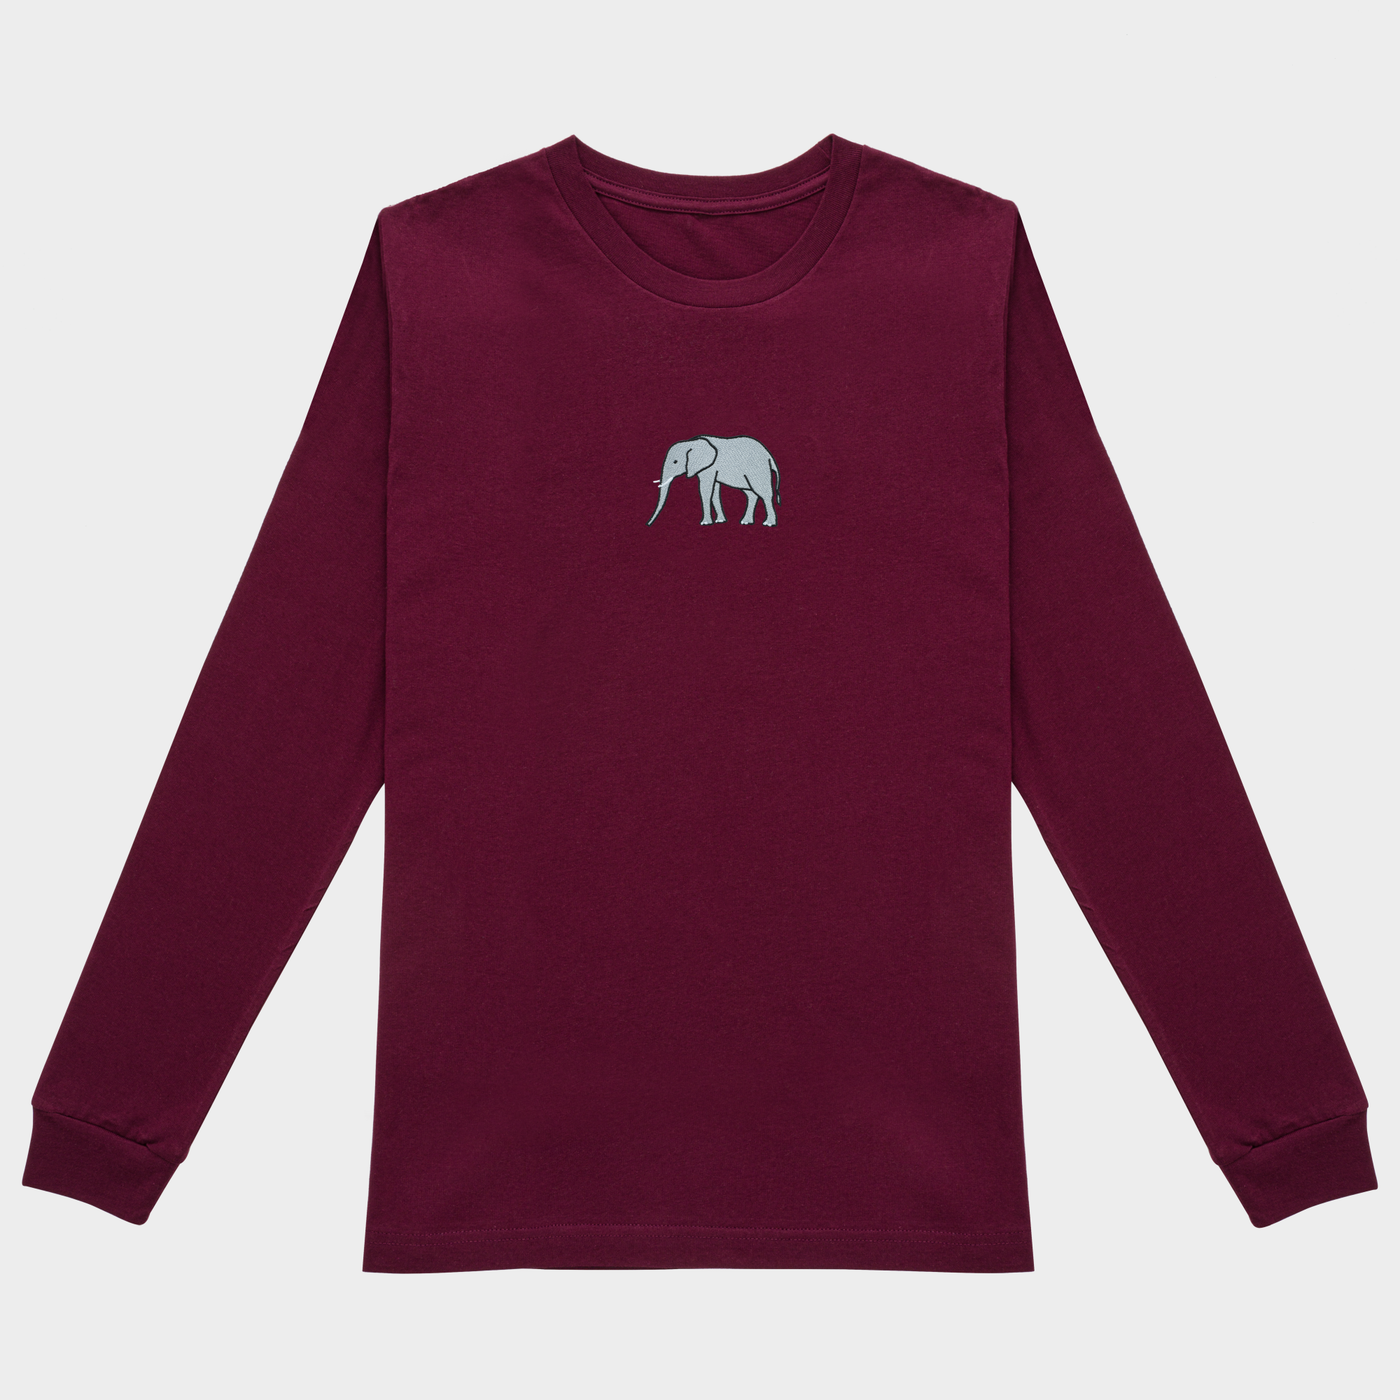 Bobby's Planet Women's Embroidered Elephant Long Sleeve Shirt from African Animals Collection in Maroon Color#color_maroon